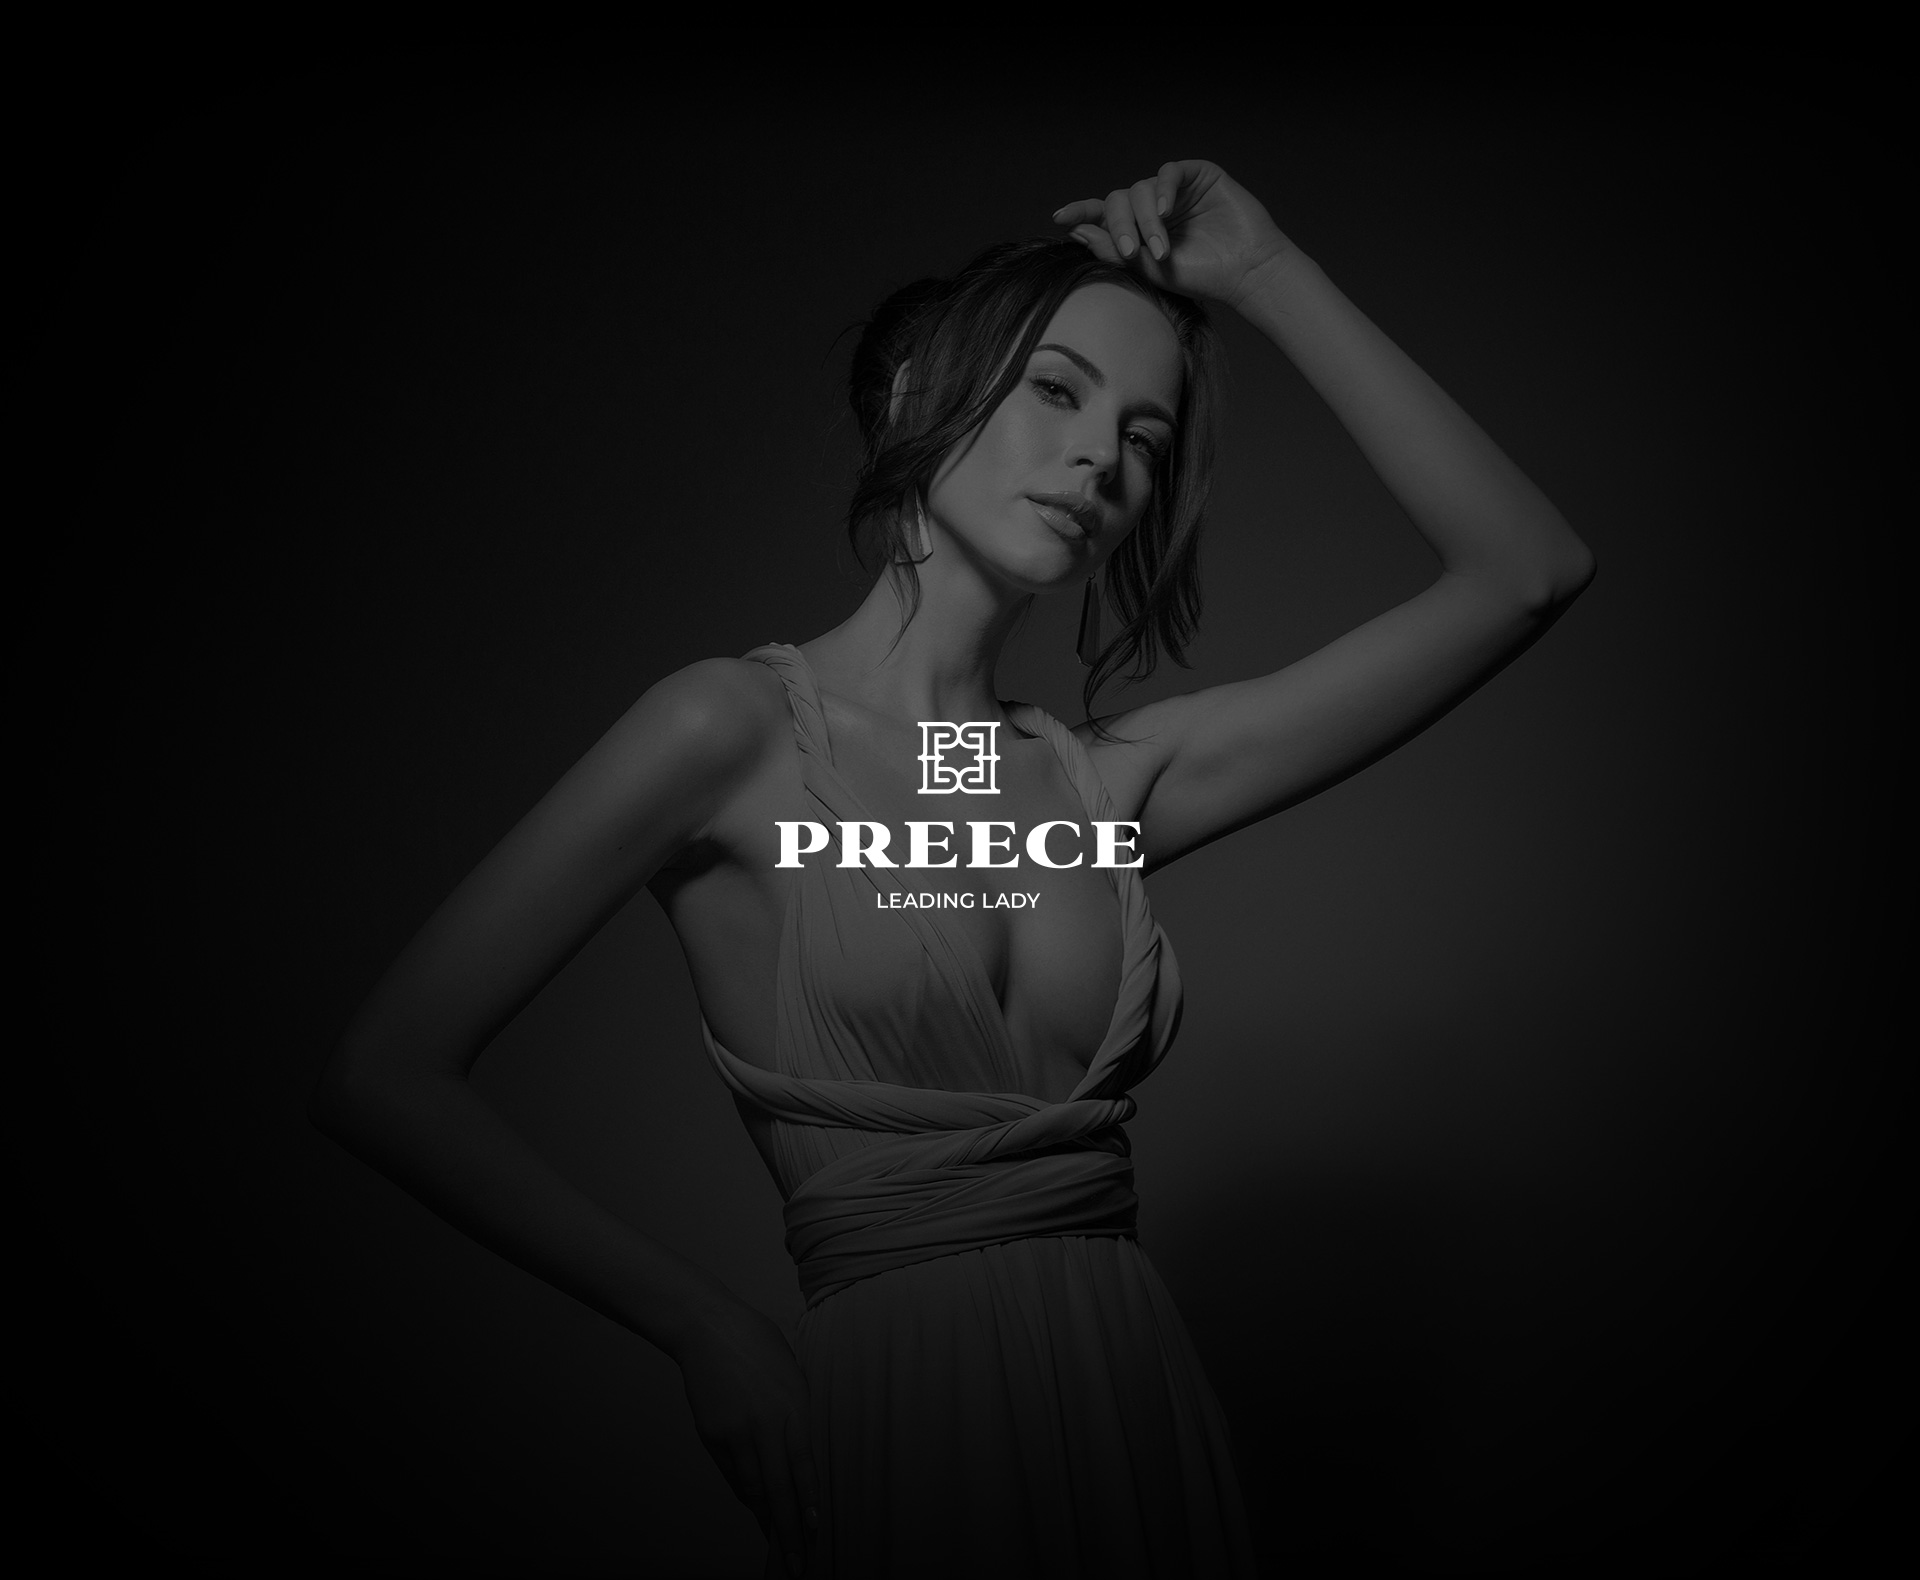 Brand Identity for Preece High Fashion Confection by Lucas Coradi